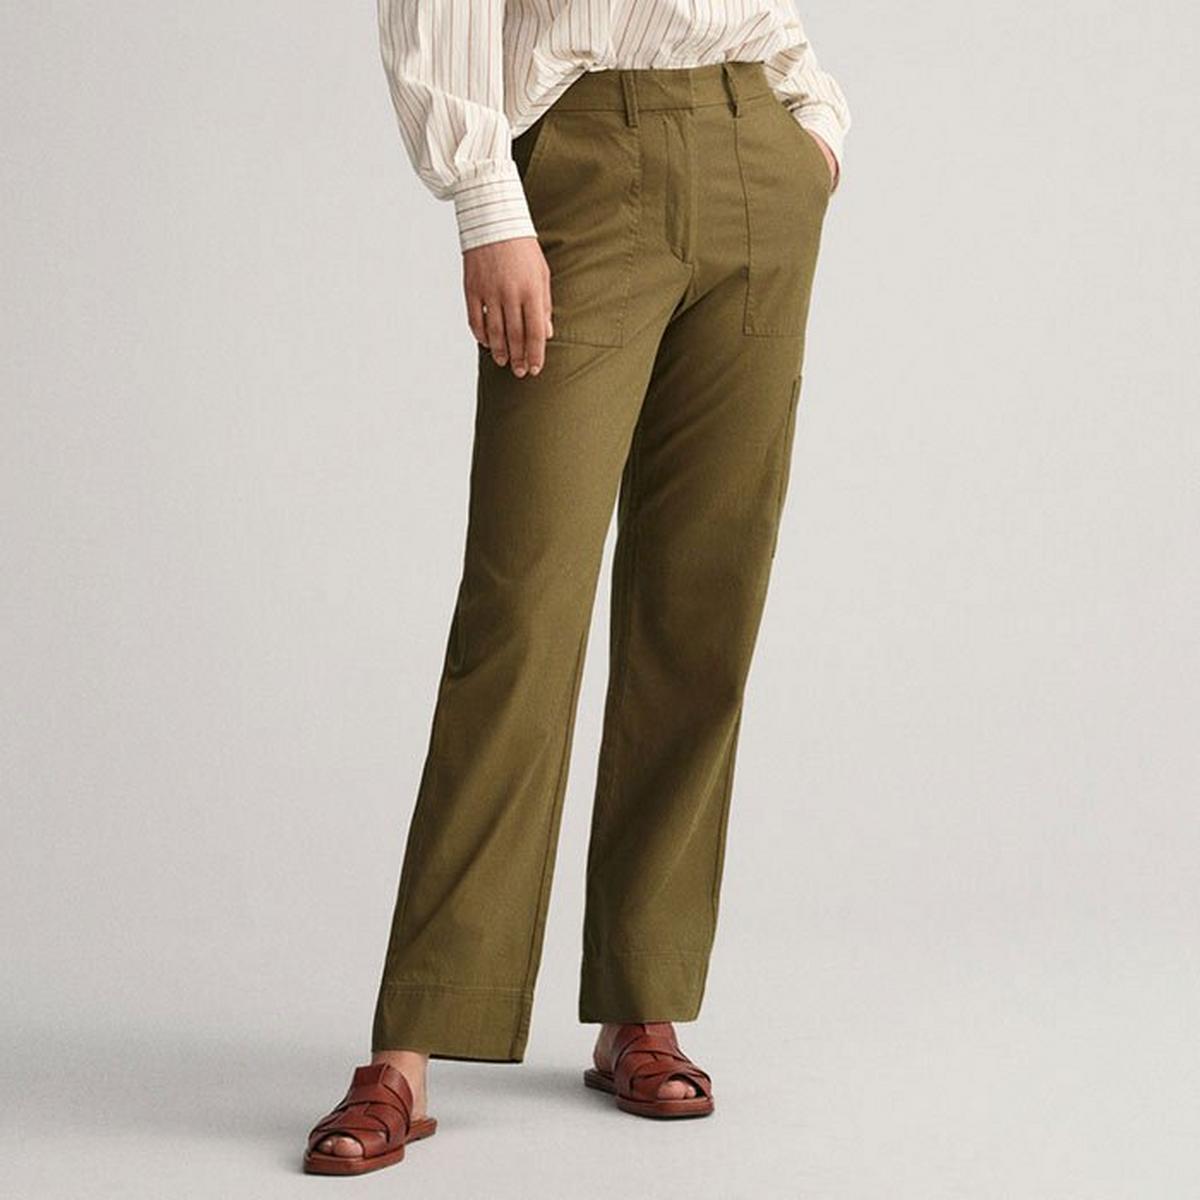 Women's Relaxed Fit Cargo Pant